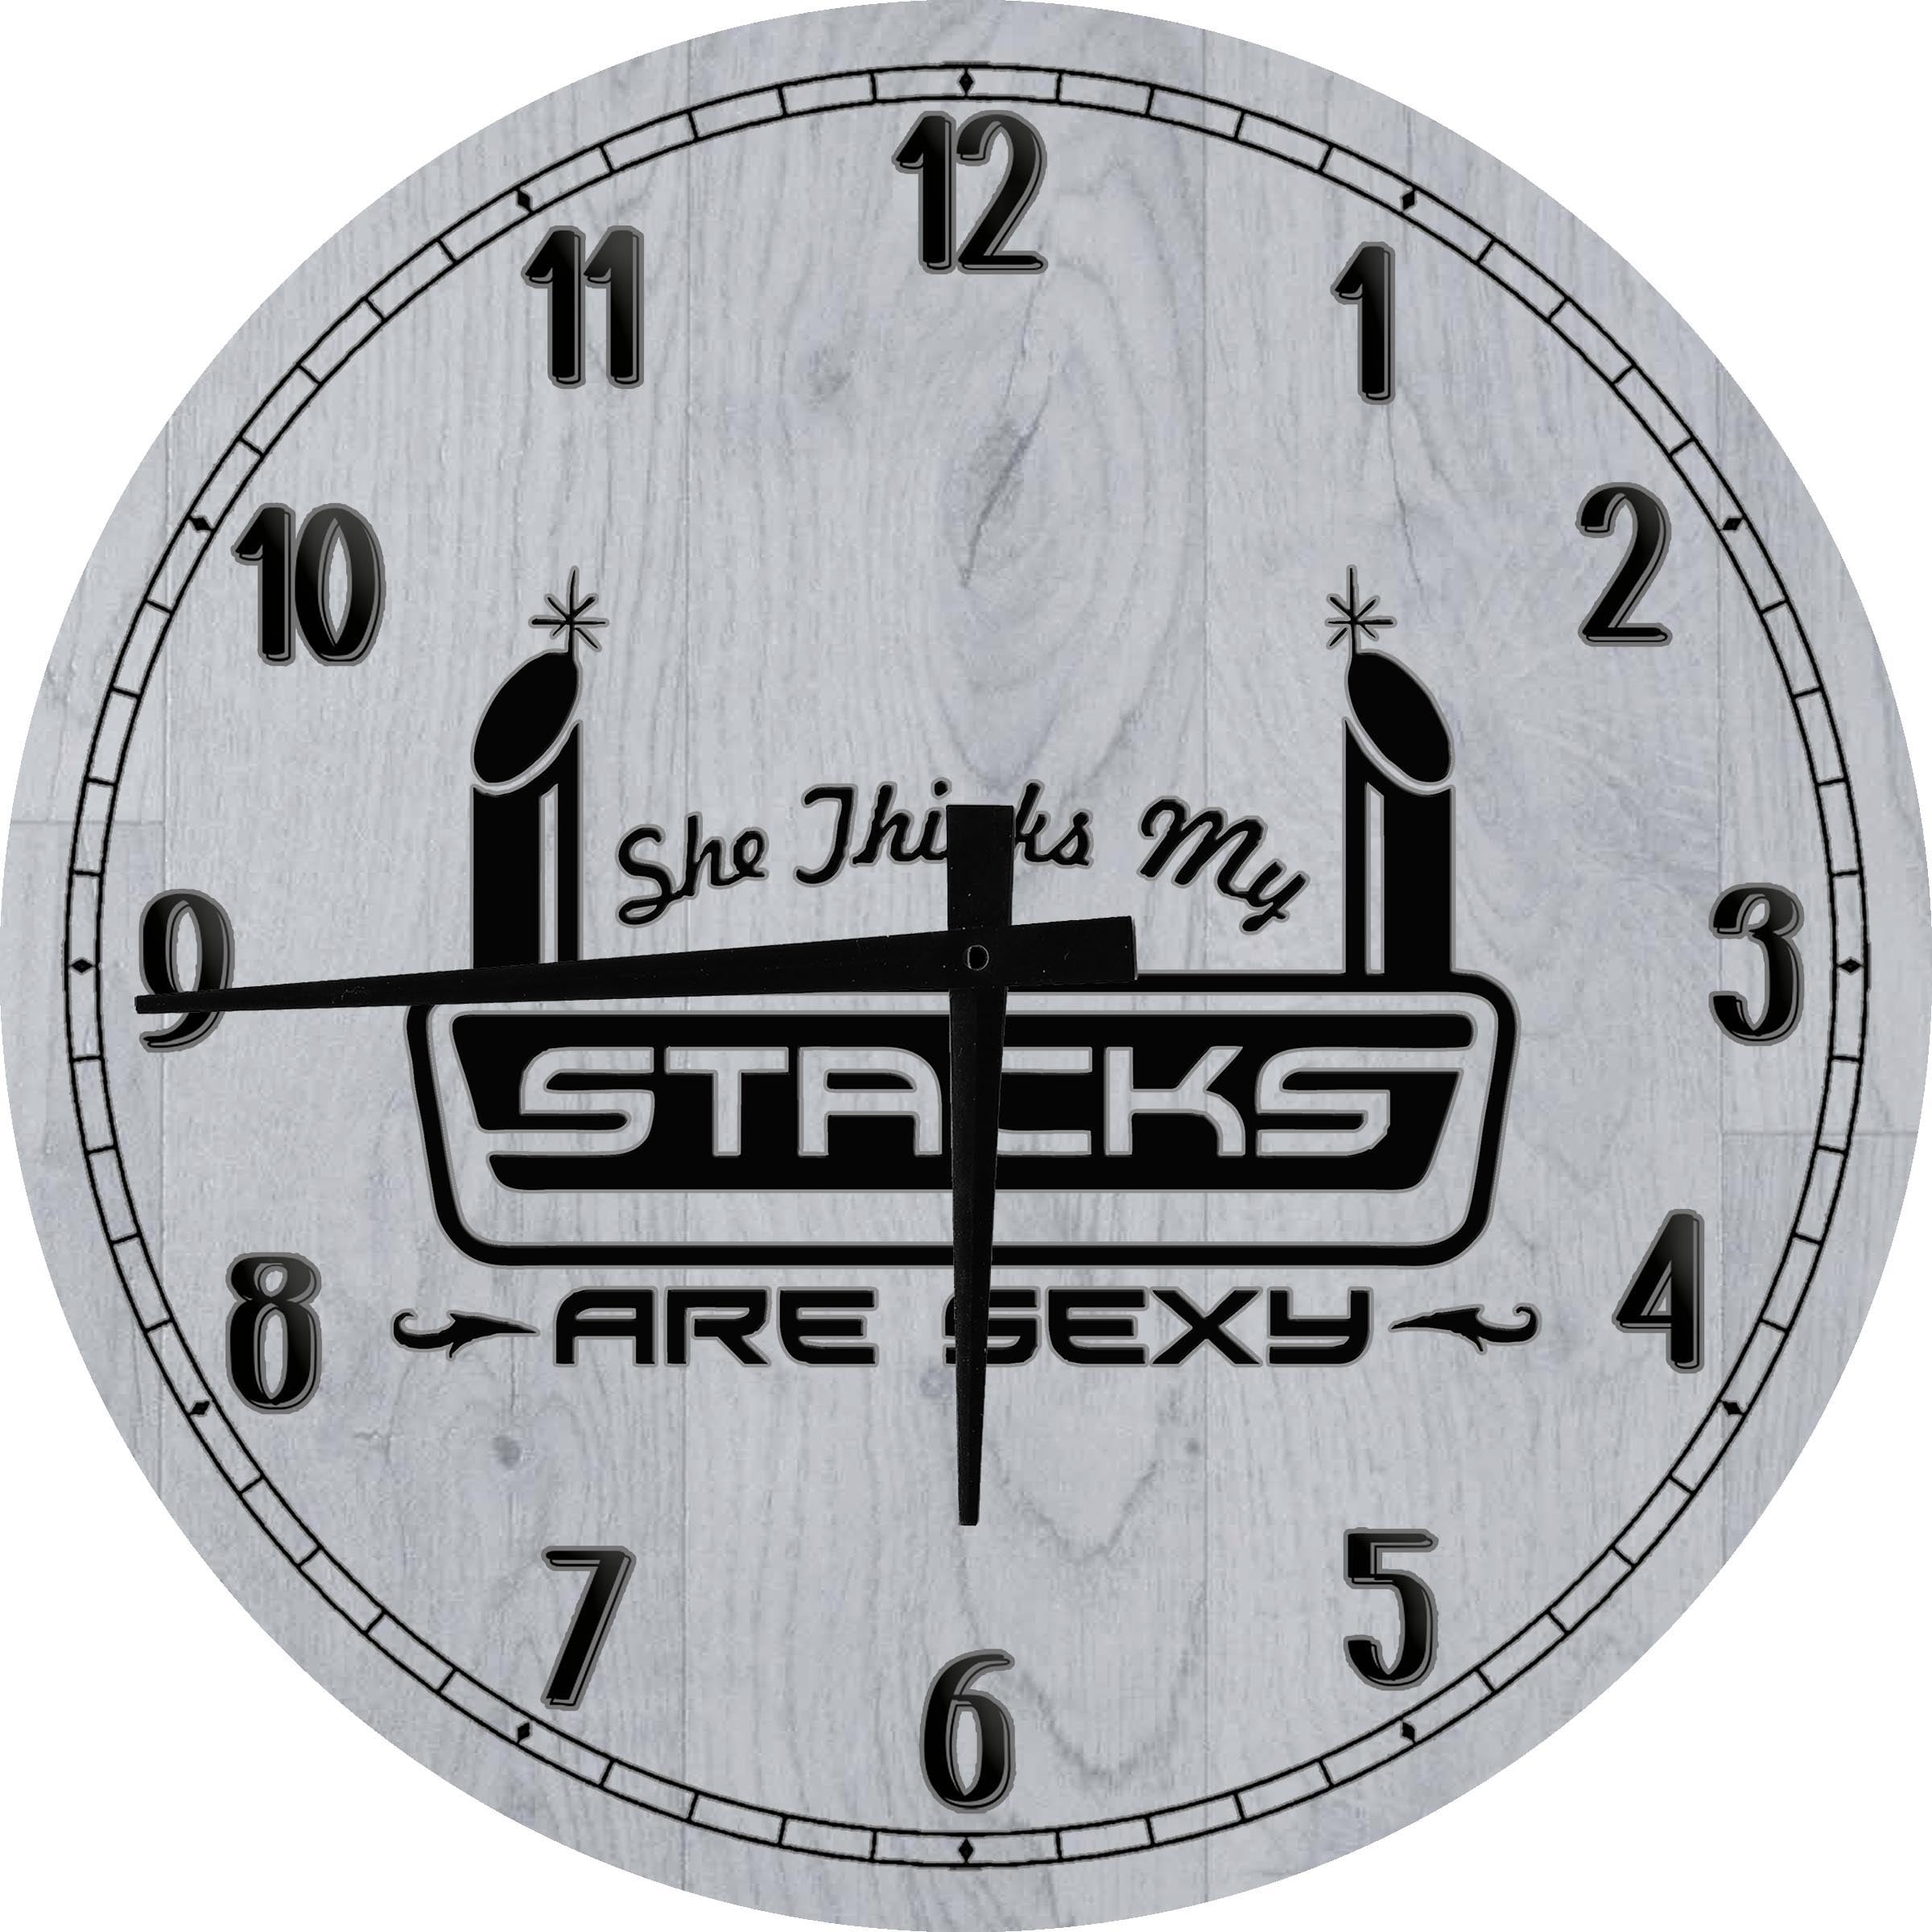 by Unbranded Wooden Wall Clock 12 Inch Life is What You Bake Bedroom, Battery Operated Wall for The Living Room Kitchen